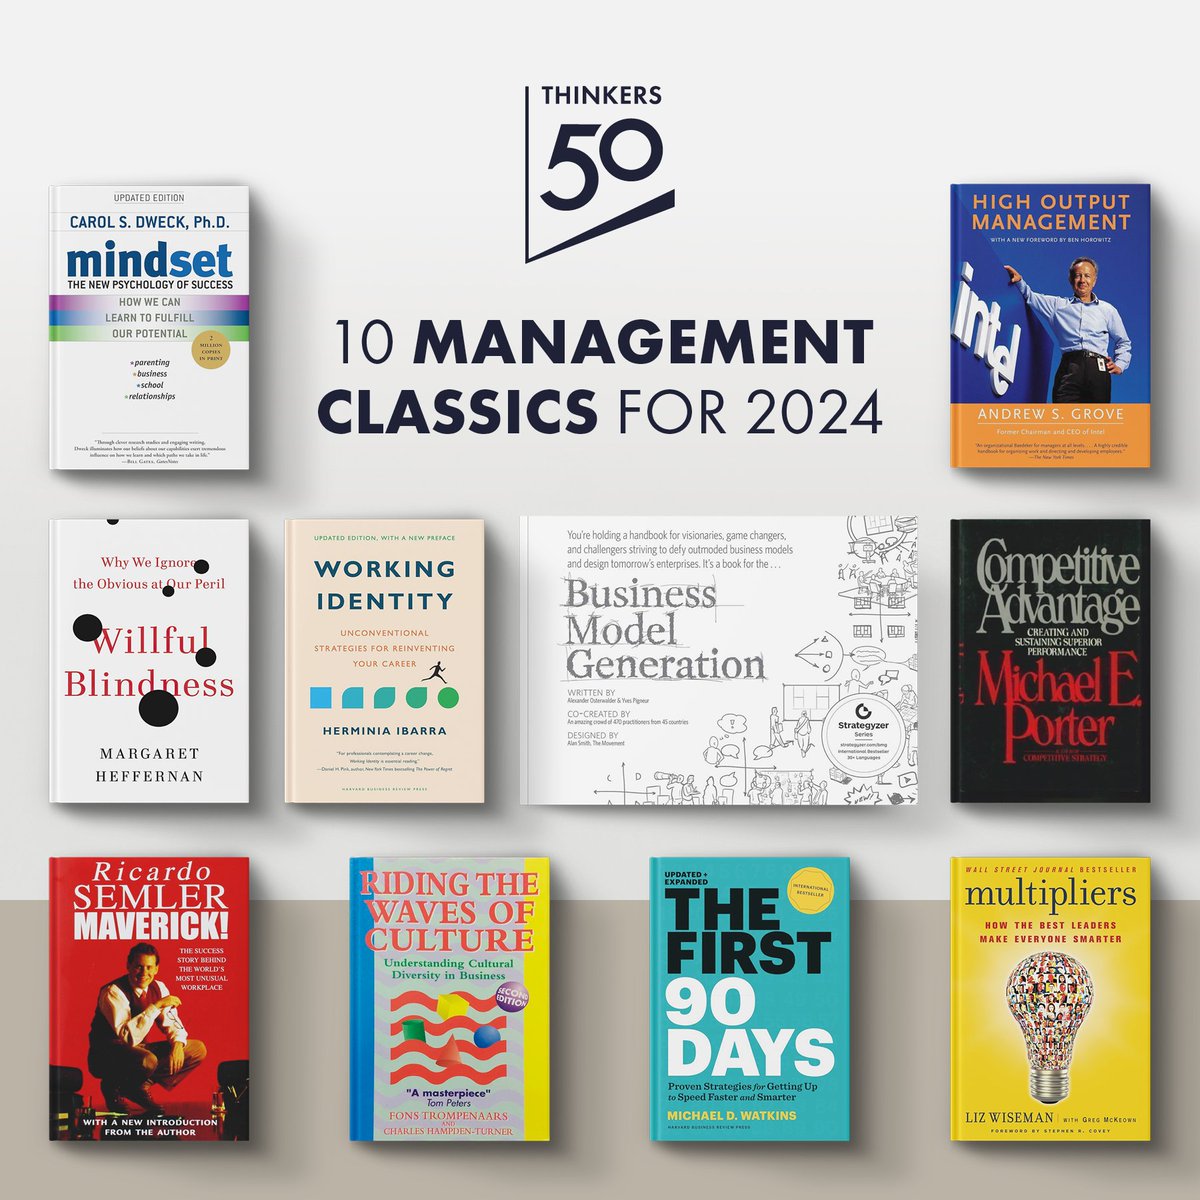 We’re no fortune tellers, but luckily we don't have to be to foretell that the books on the Classics Booklist will make great reading for everyone interested in management and business: thinkers50.com/booklists/#man…